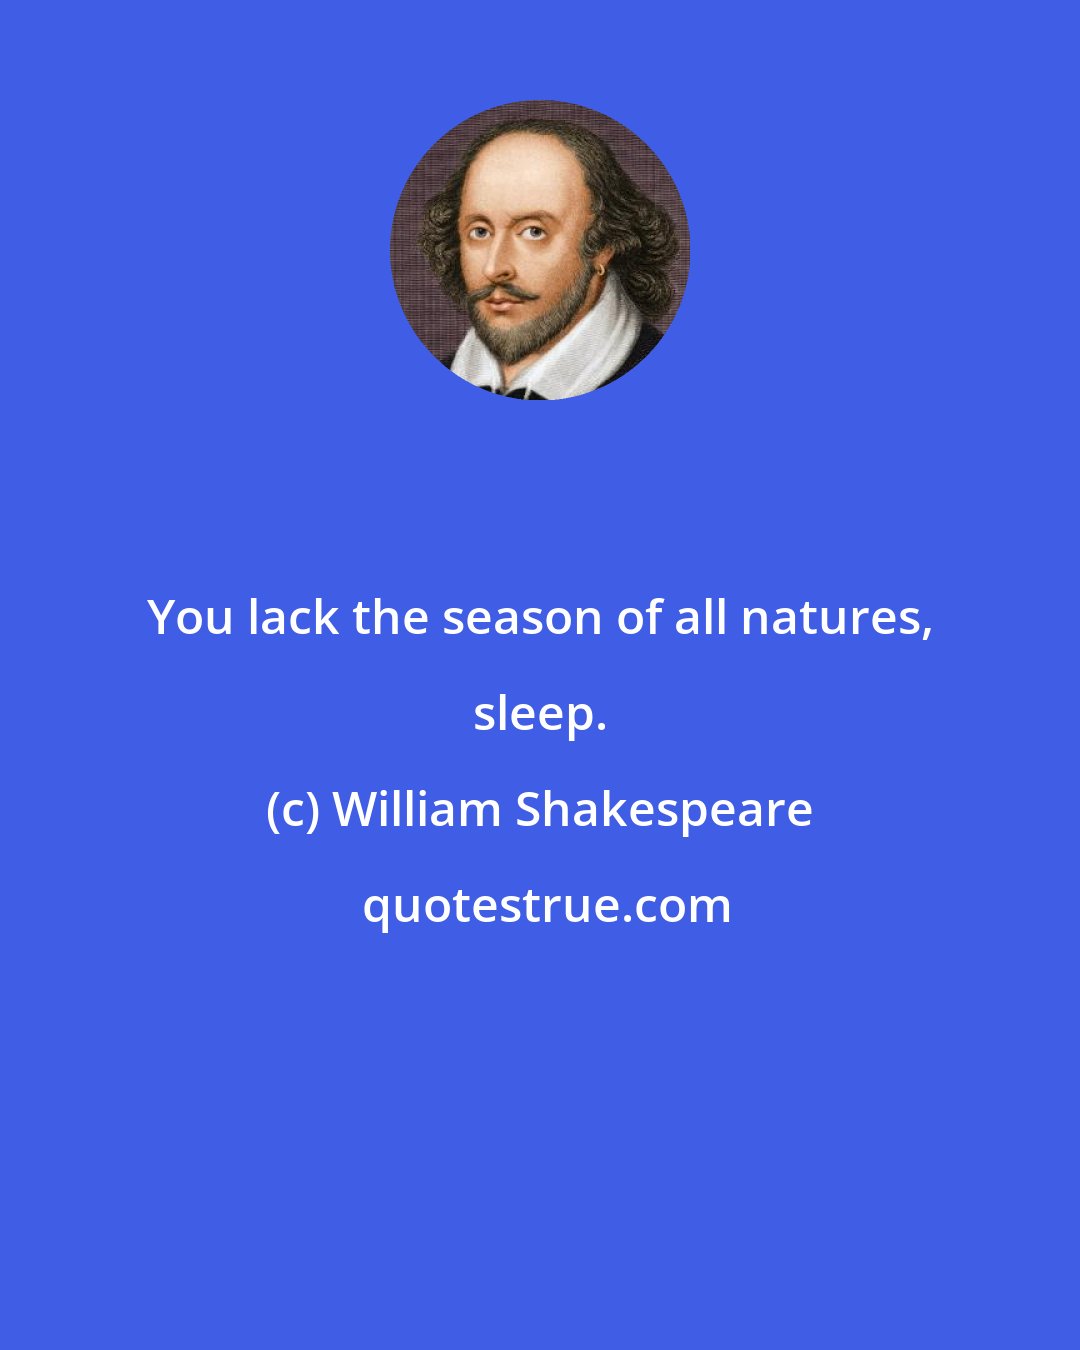 William Shakespeare: You lack the season of all natures, sleep.